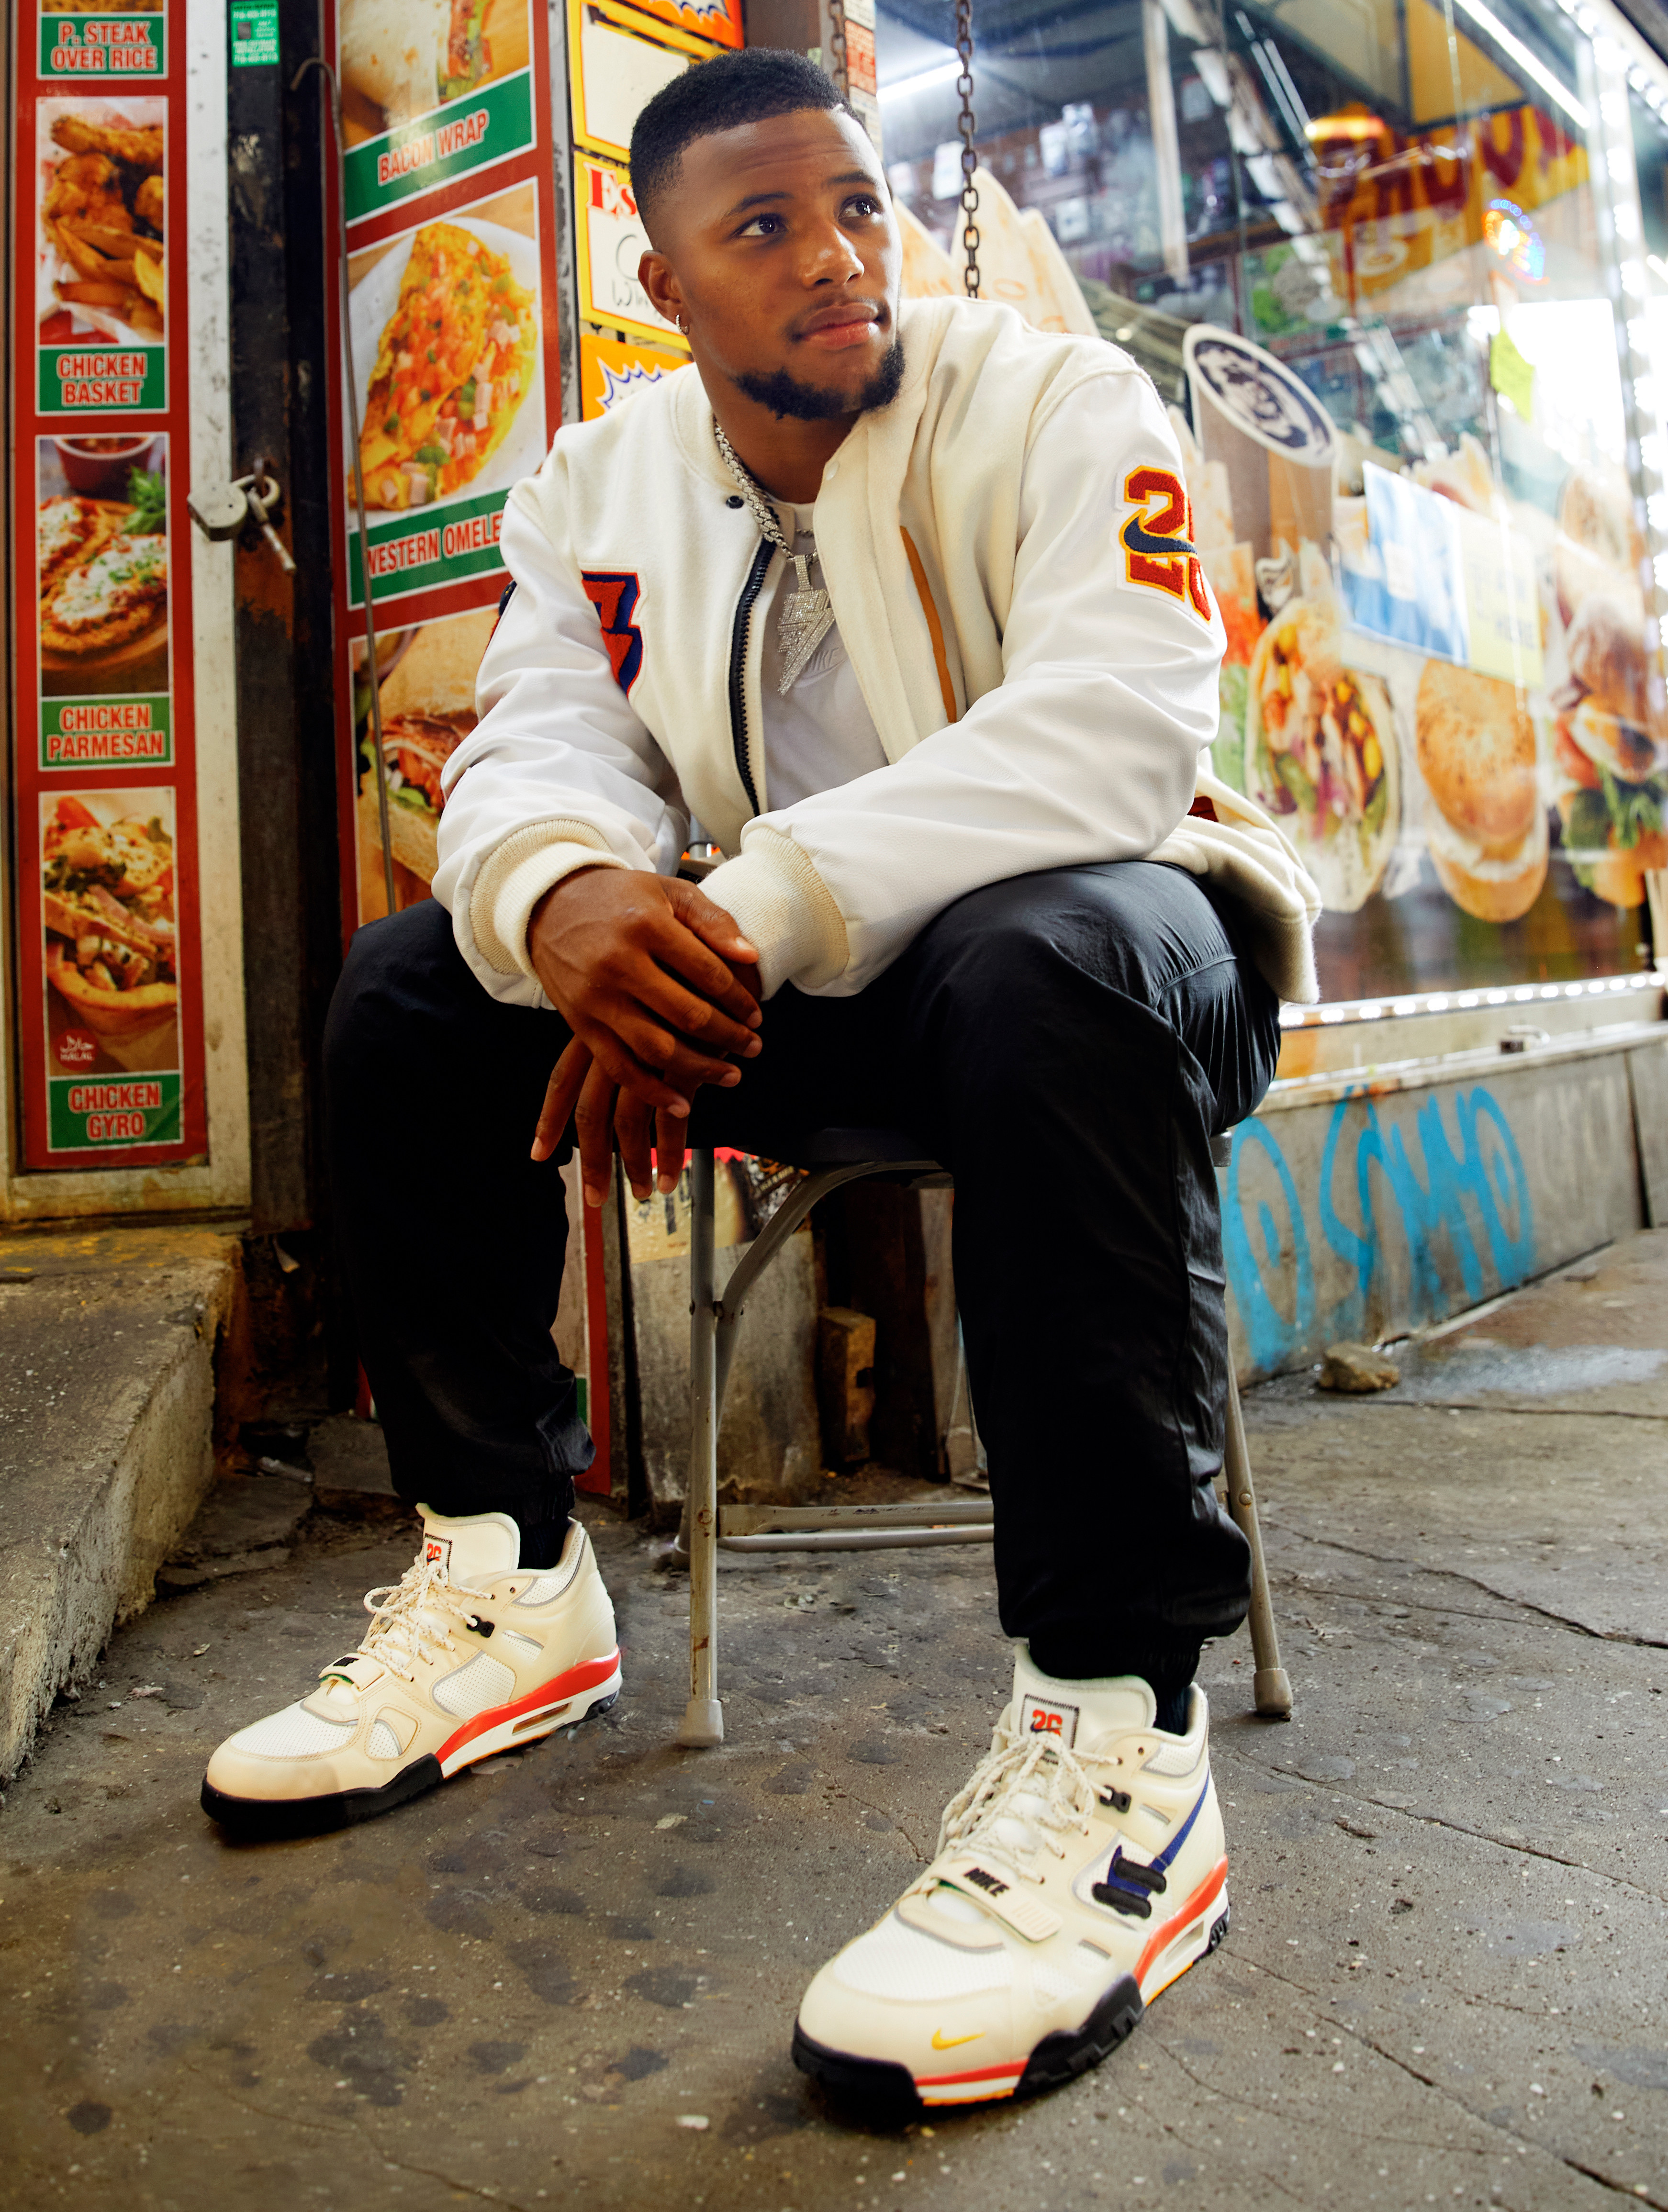 Saquon Barkley Designs His Own Nike Air Trainer 3 Colorway